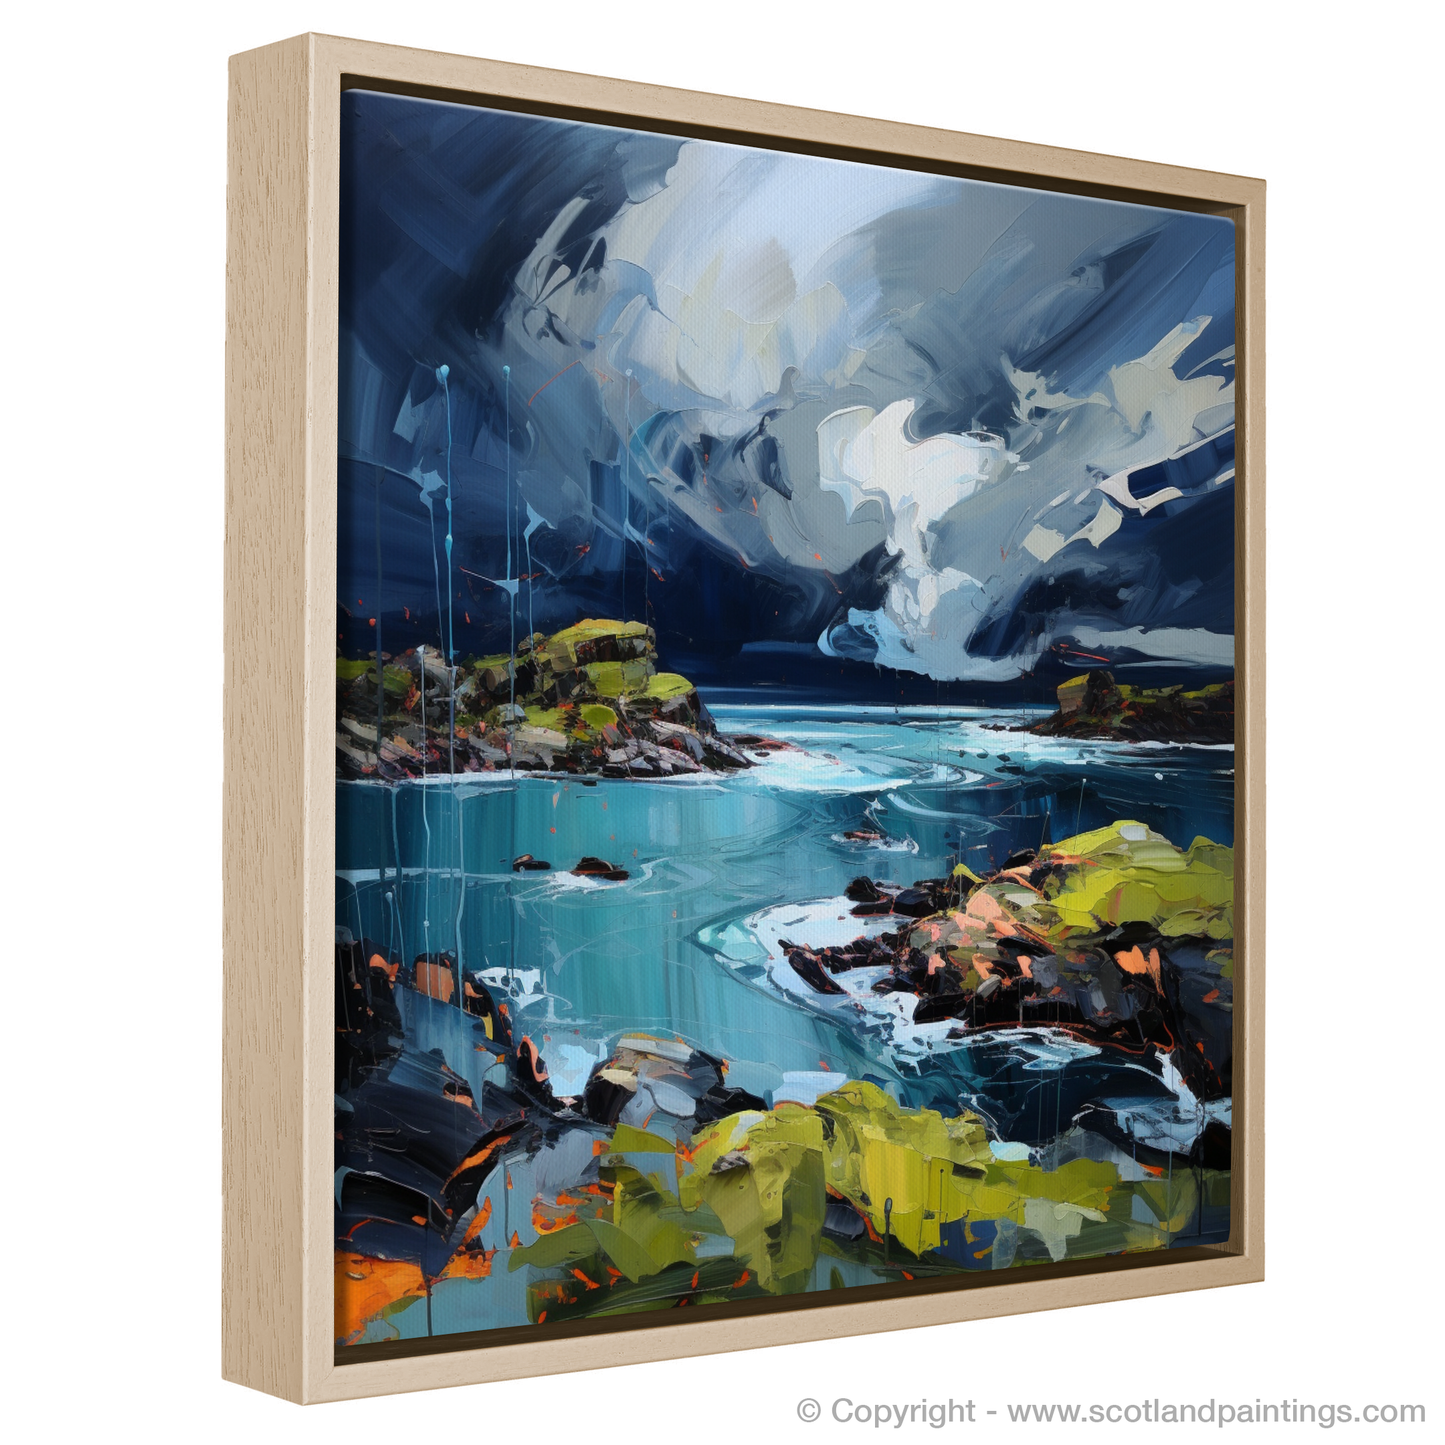 Painting and Art Print of Ardalanish Bay with a stormy sky entitled "Storm Over Ardalanish Bay: An Expressionist Ode to Scottish Coves".